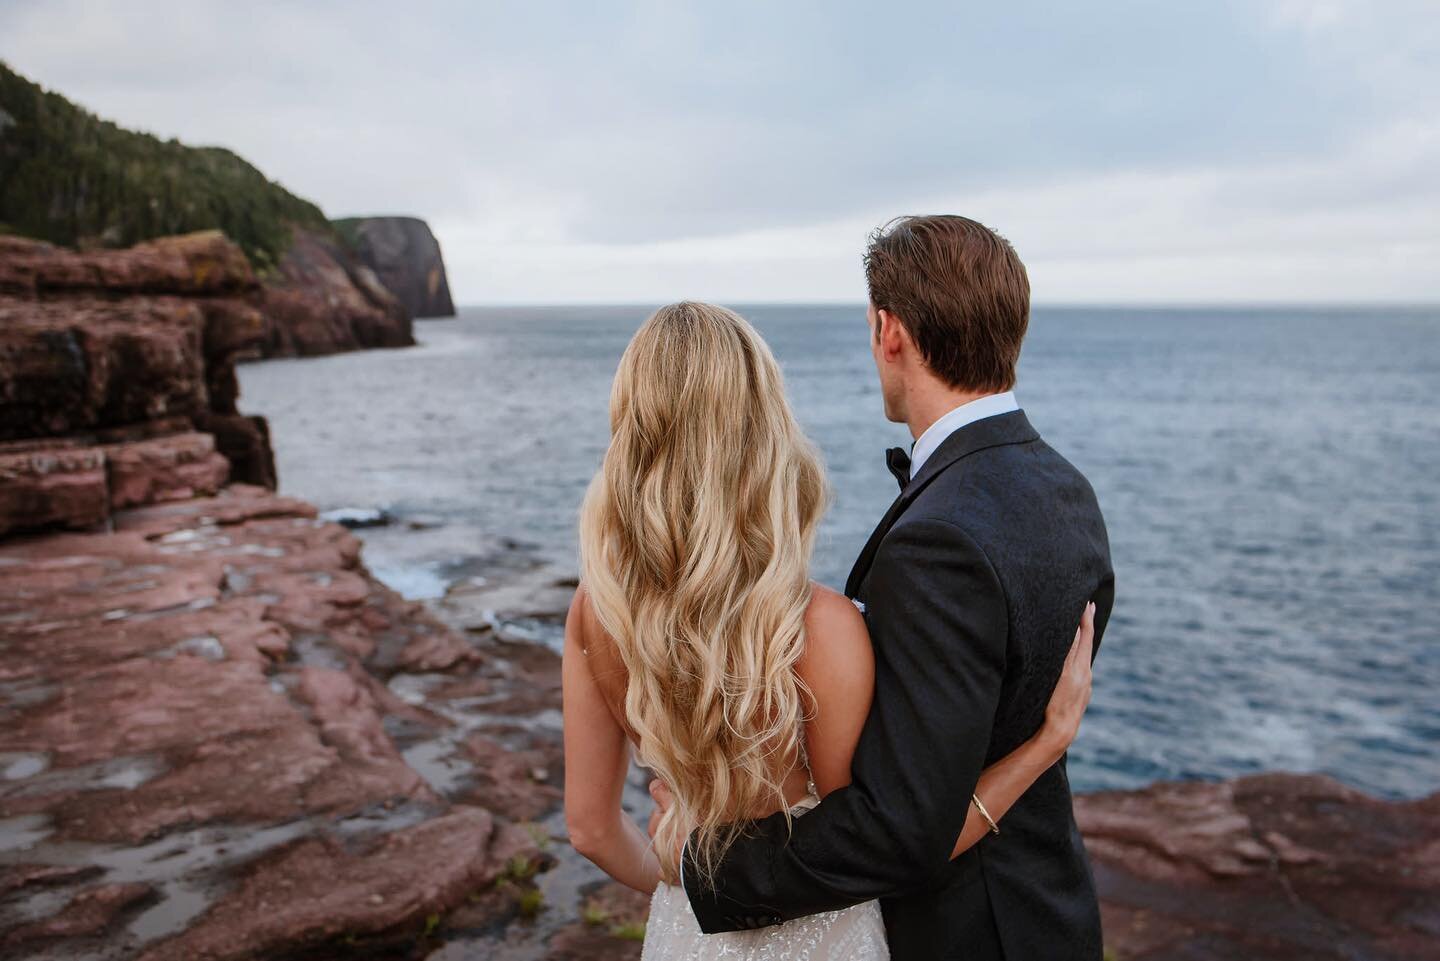 Looking for a unique wedding experience? St. John's, Newfoundland has it all - stunning coastal views, historic architecture, and warm hospitality. Ask us about our accommodation packages and plan your dream wedding in this unforgettable destination.